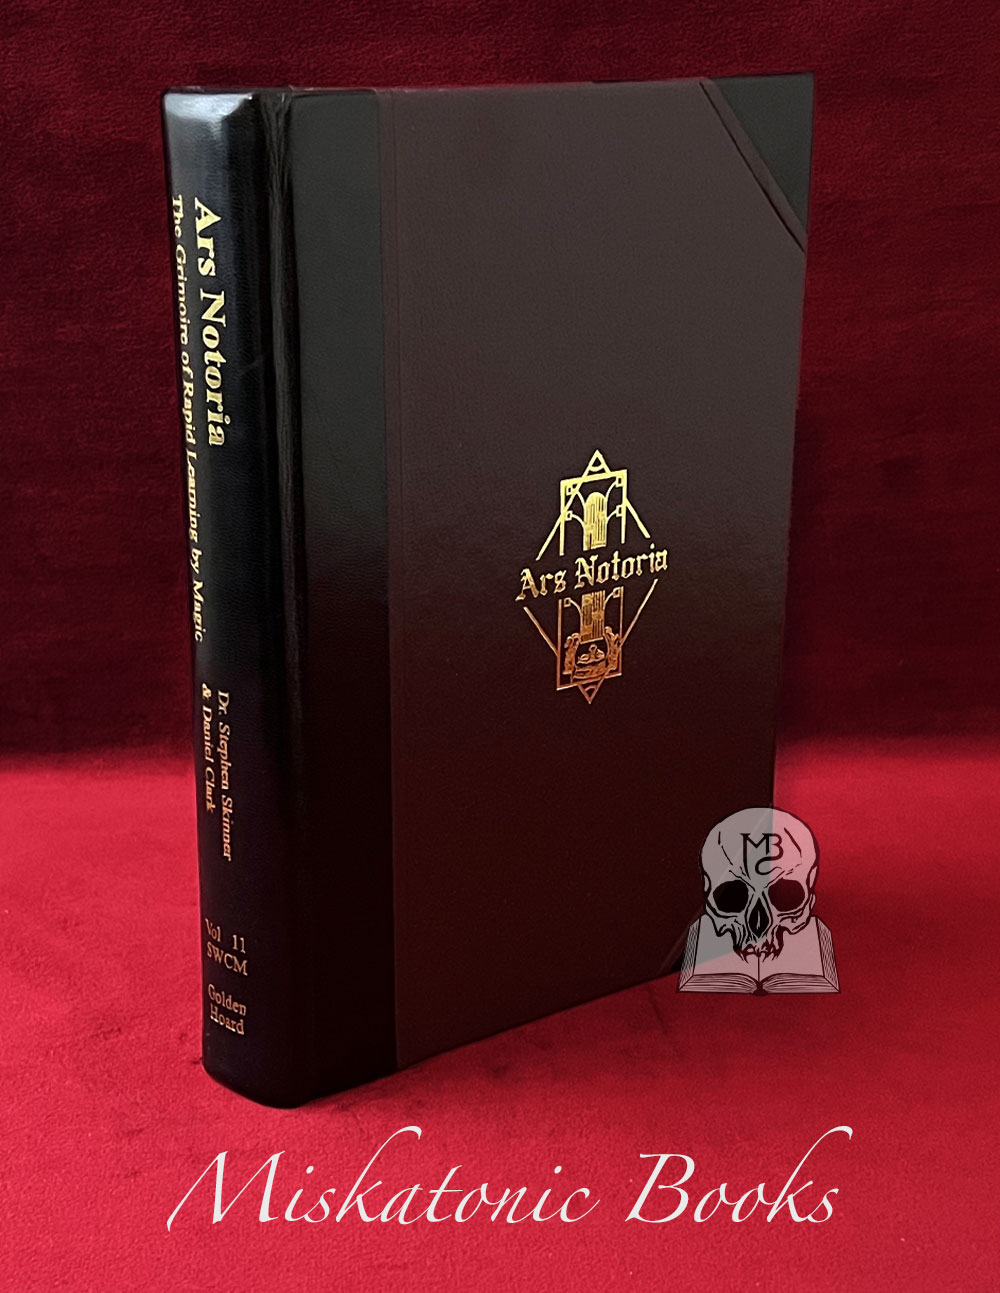 Ars Notoria version A: The Grimoire of Rapid Learning by Magic with the Golden Flowers of Apollonius of Tyana  Translated by Robert Turner Edited and Introduced by Dr Stephen Skinner & Daniel Clark - Deluxe Leather Bound Limited Edition